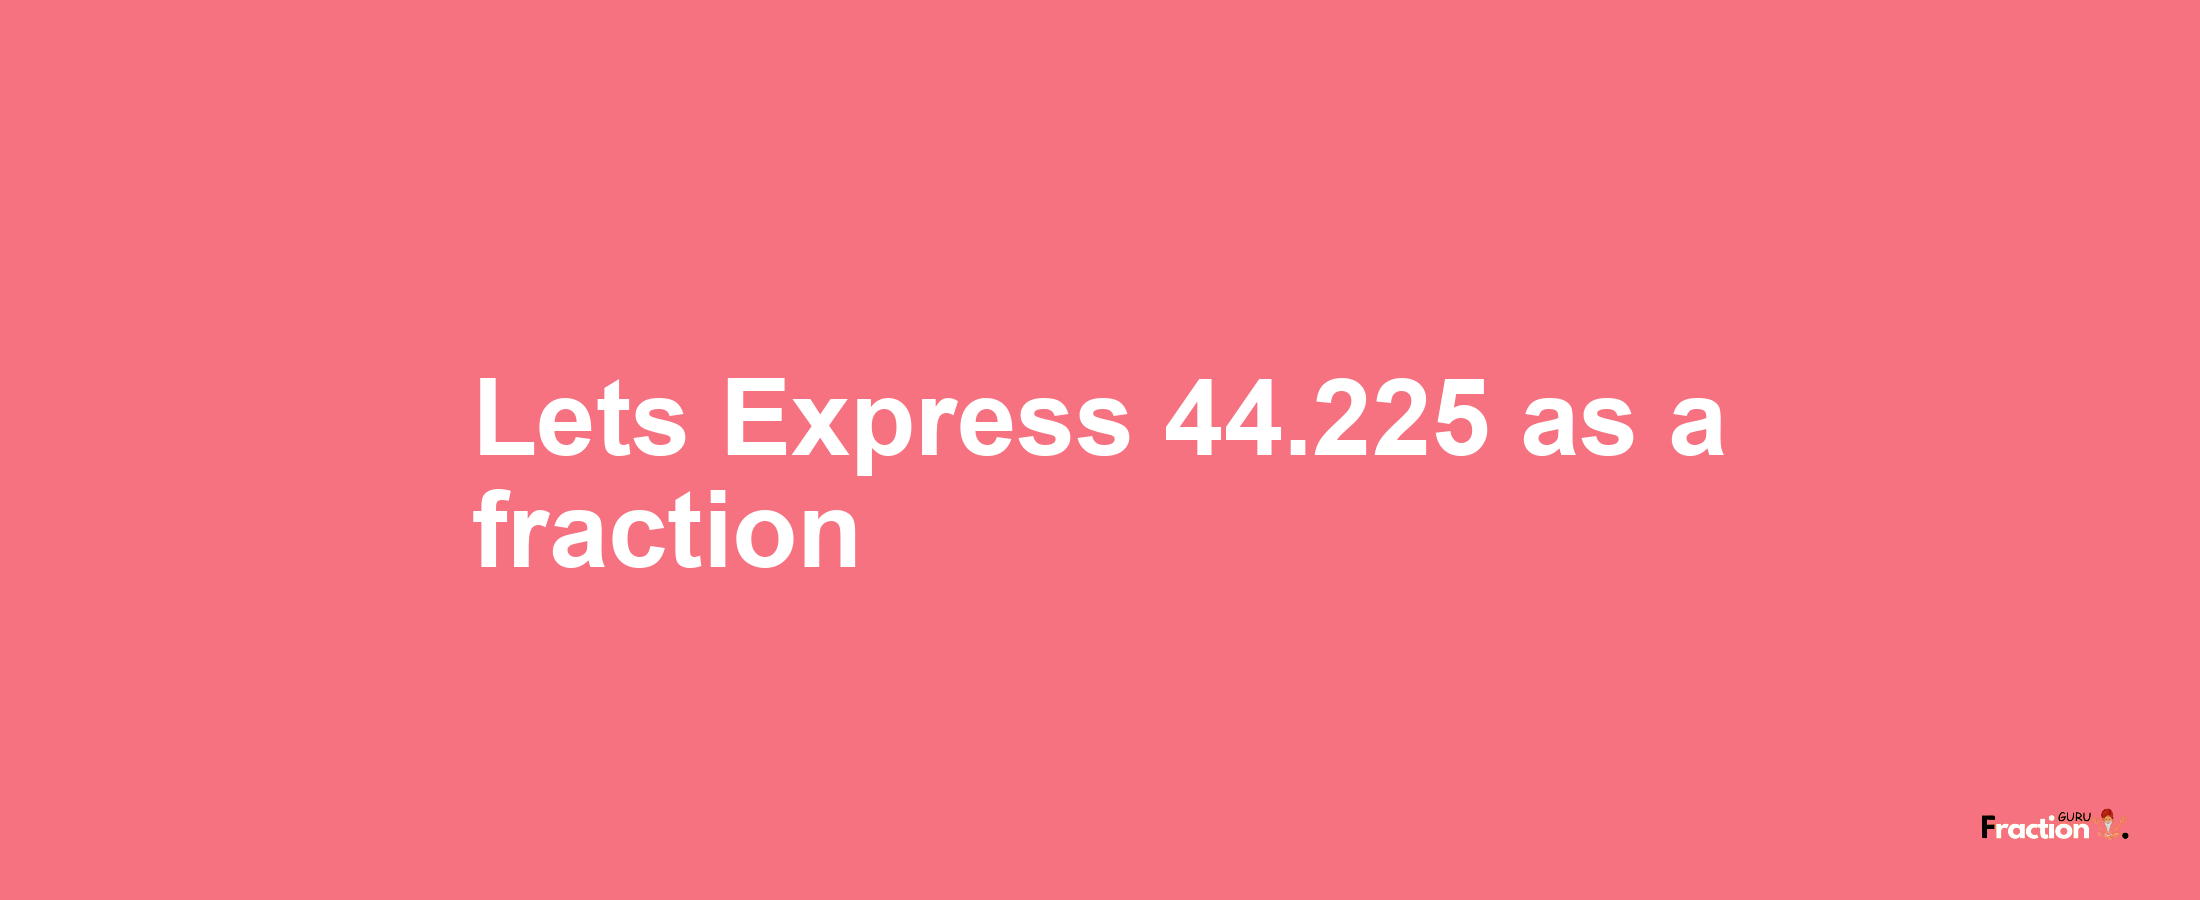 Lets Express 44.225 as afraction